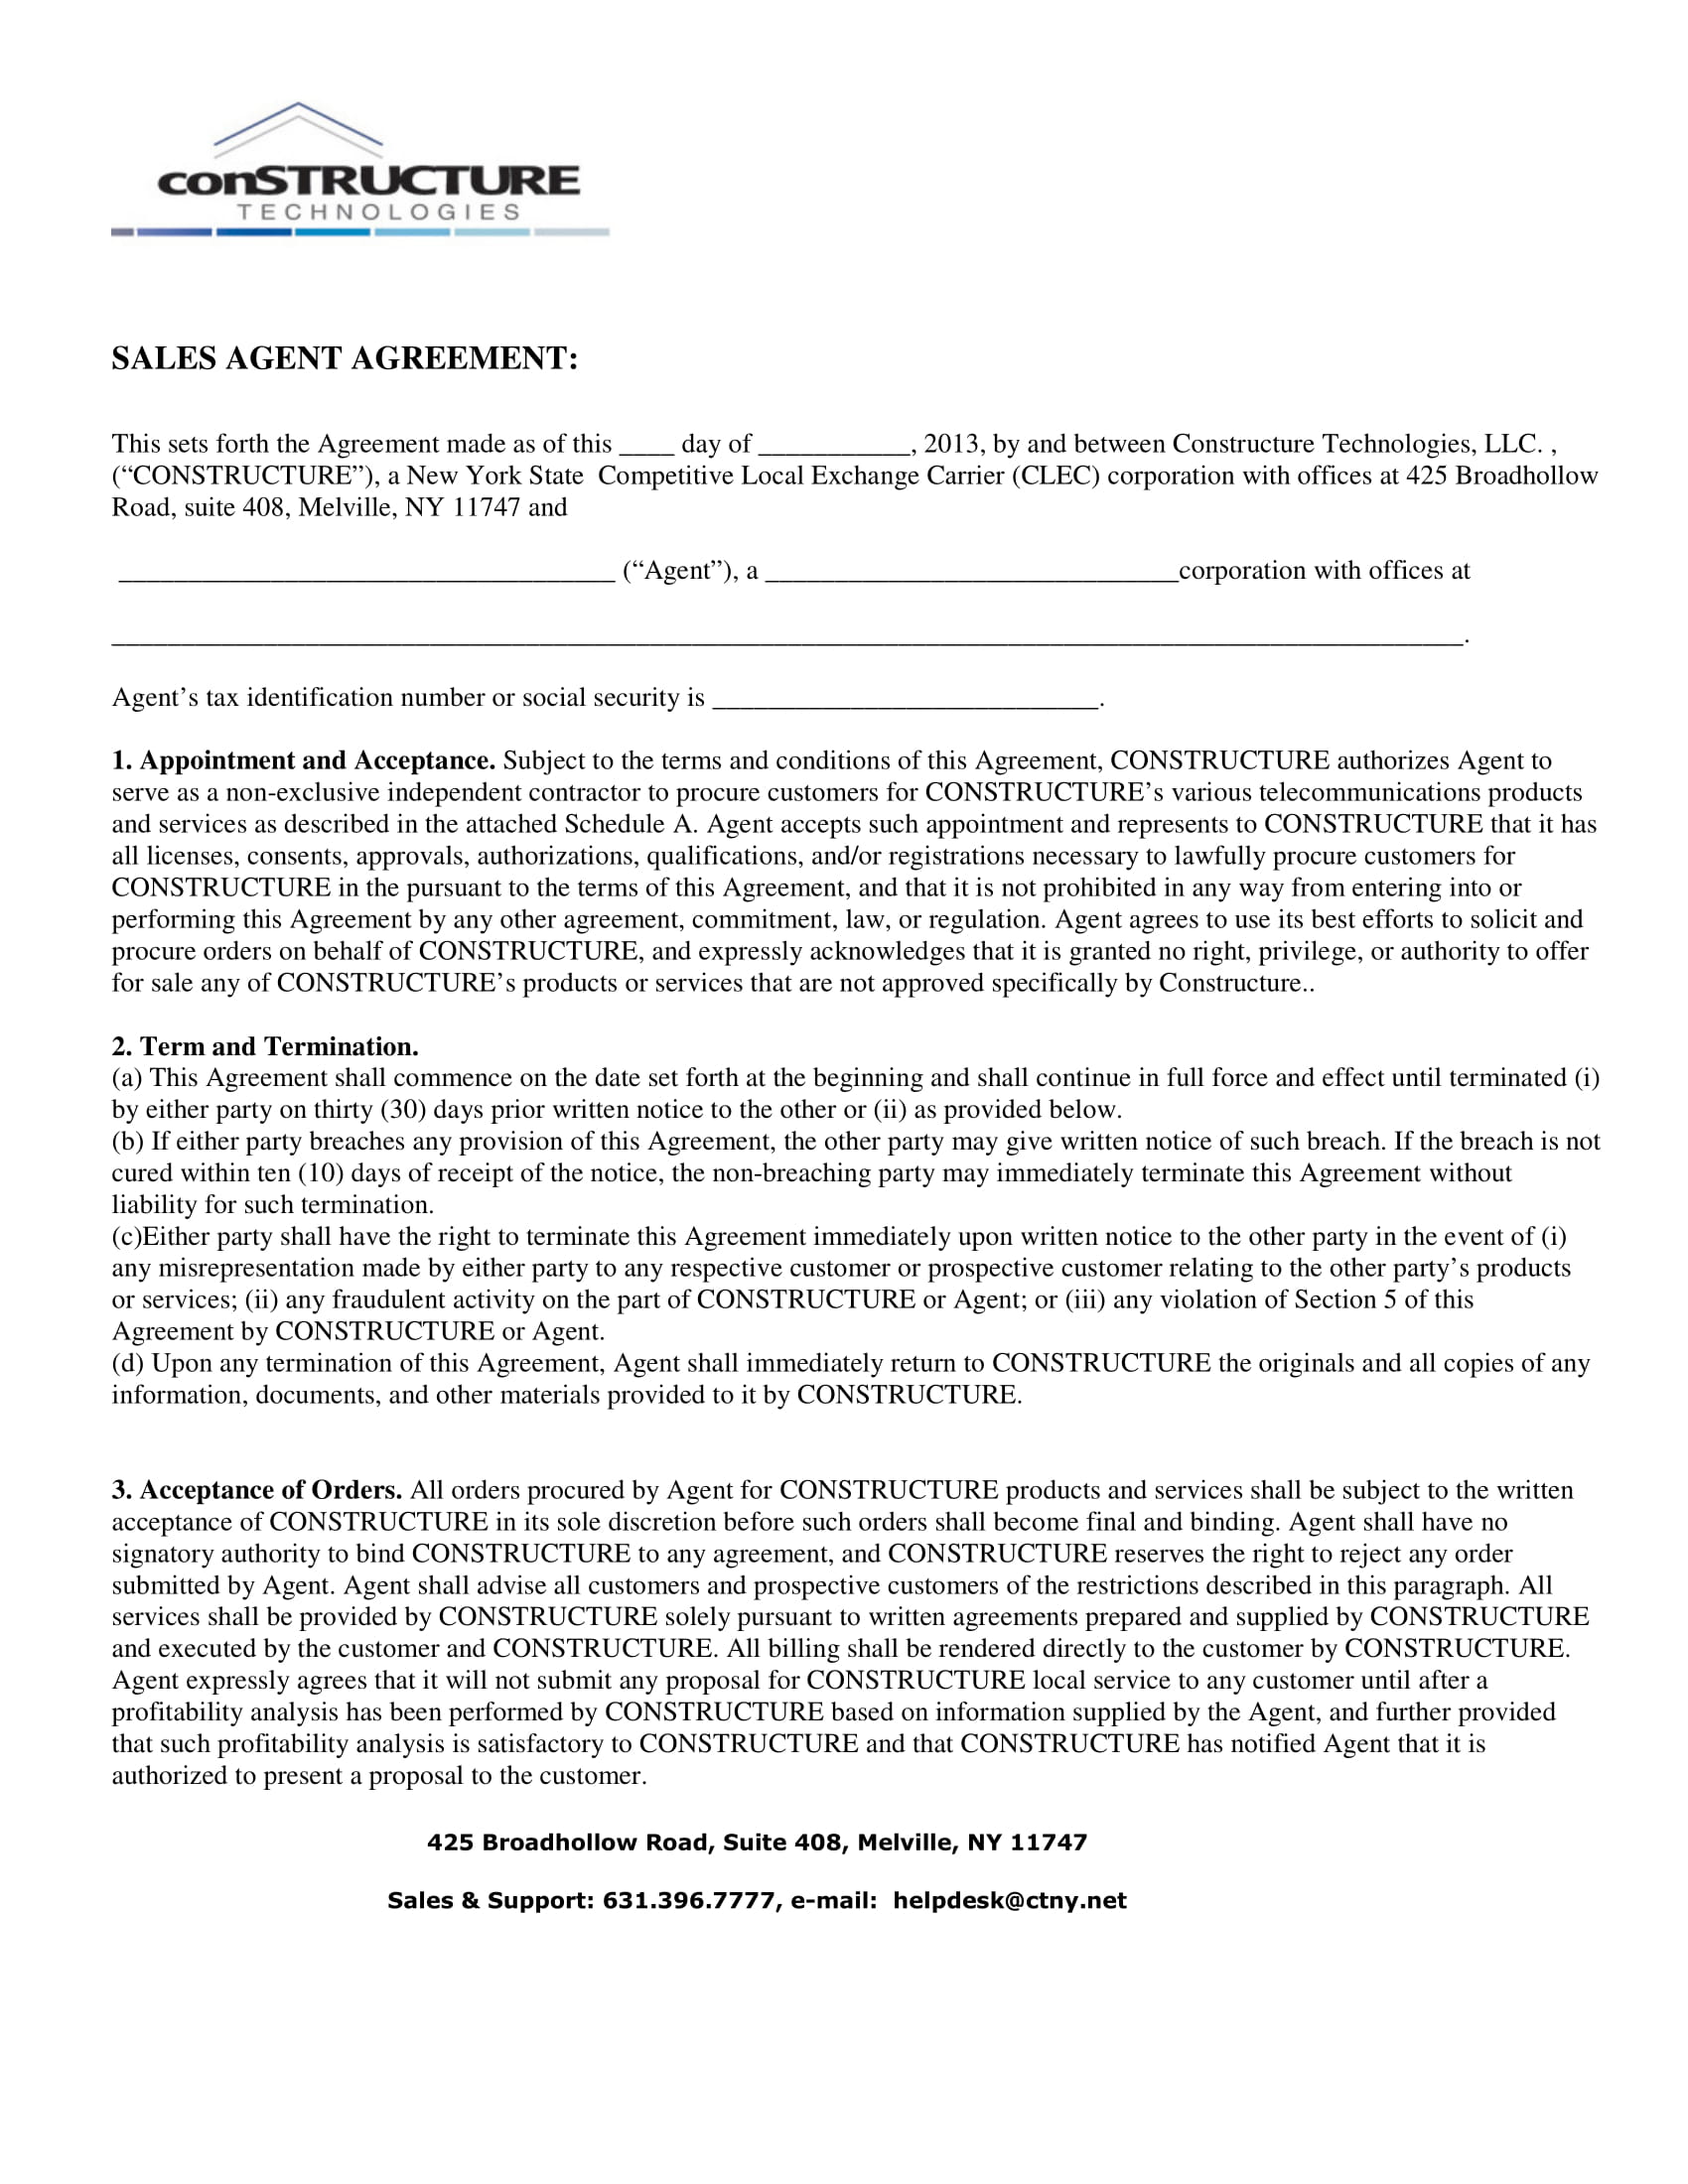 sales agent agreement contract form 1